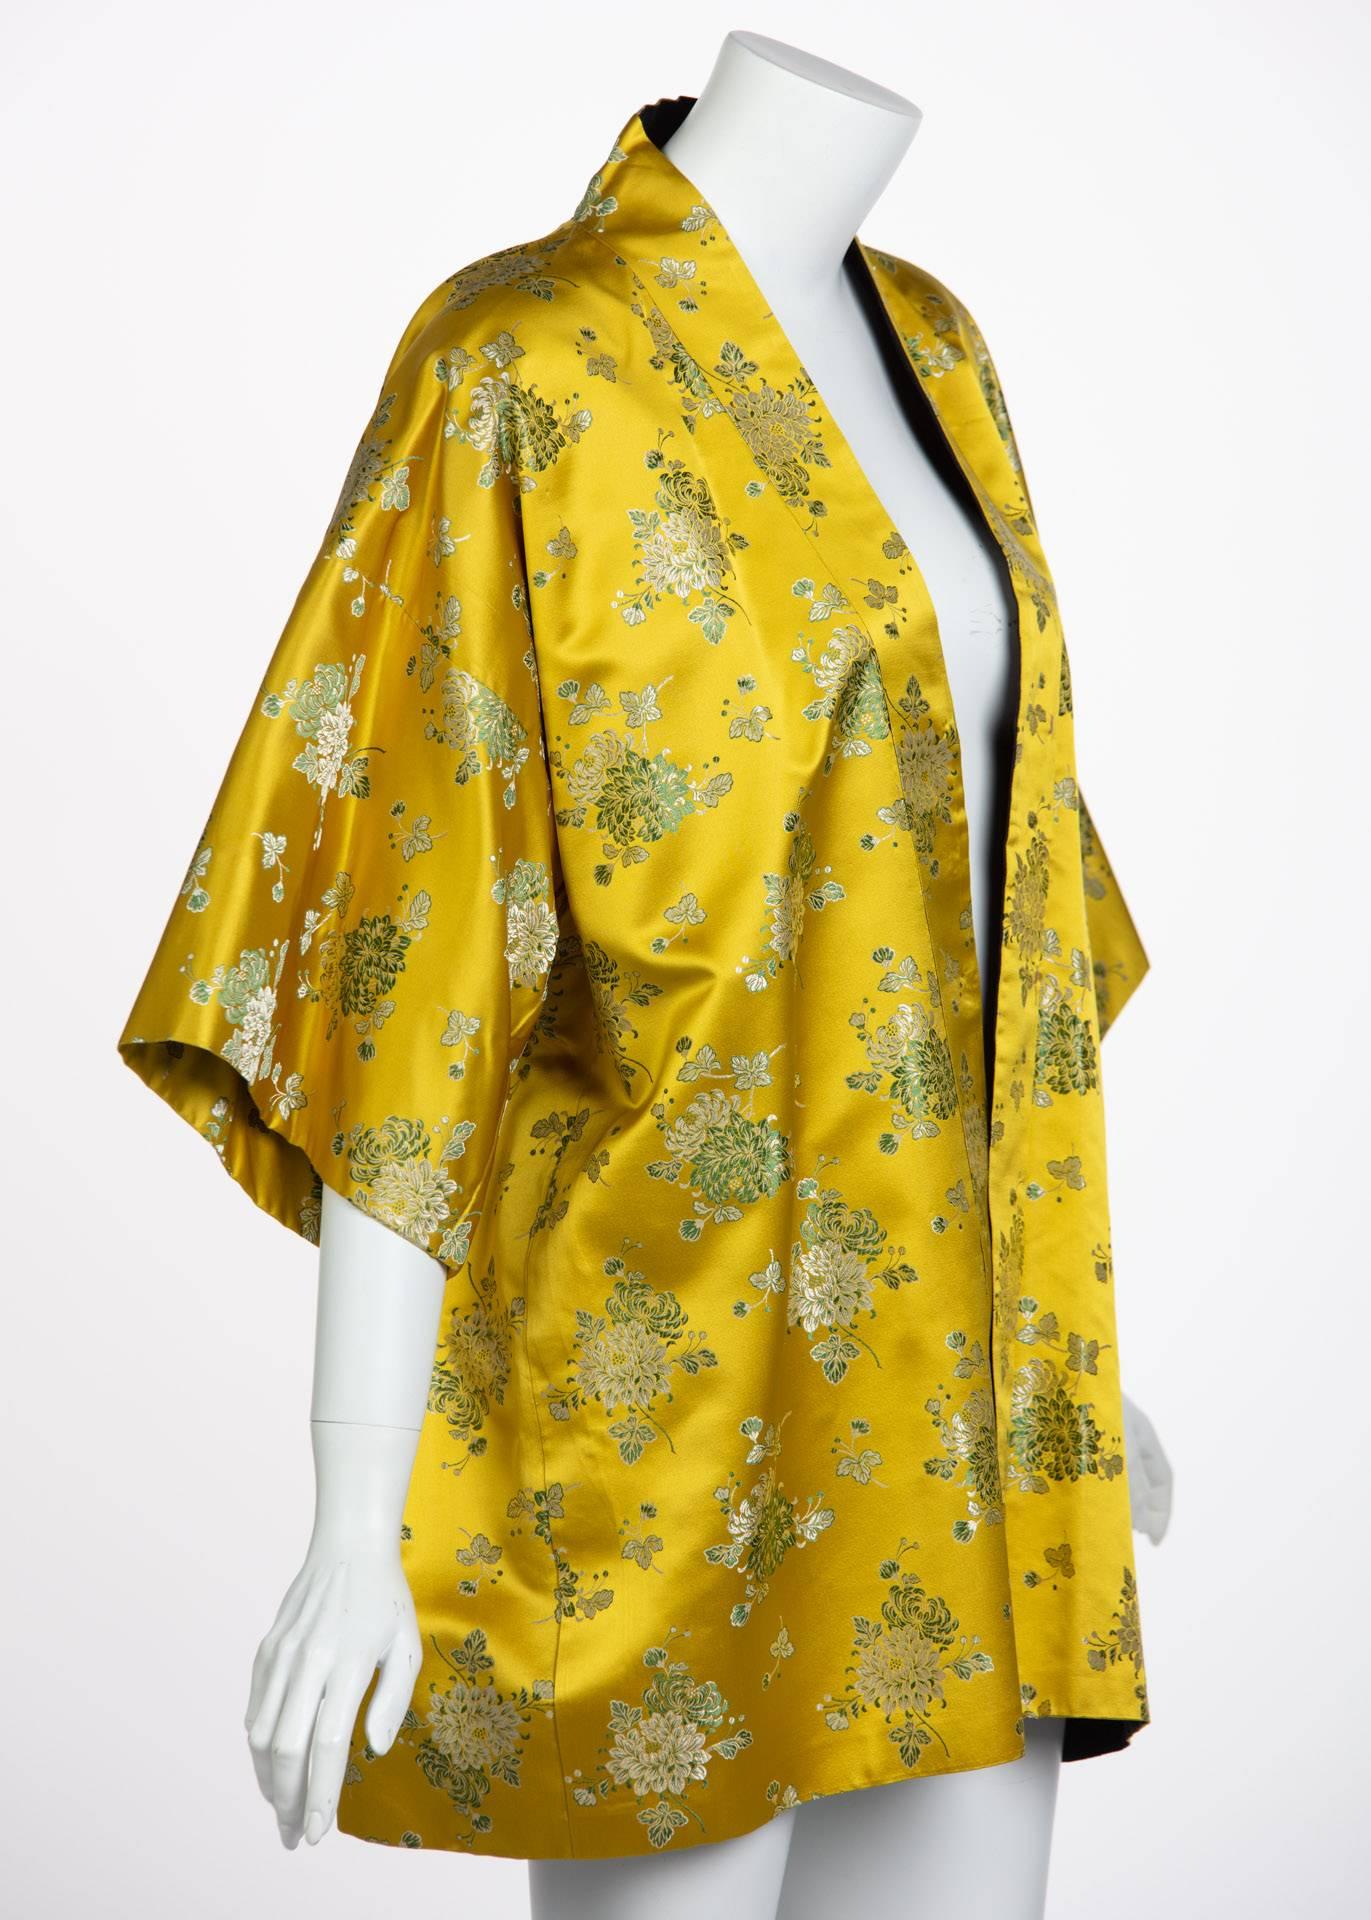 Chinese garments have historically been made with silk and fantastically woven textiles known as brocades that features traditional imagery and motifs, especially florals. Bold colors often set the ground for brocades. Because of all of these